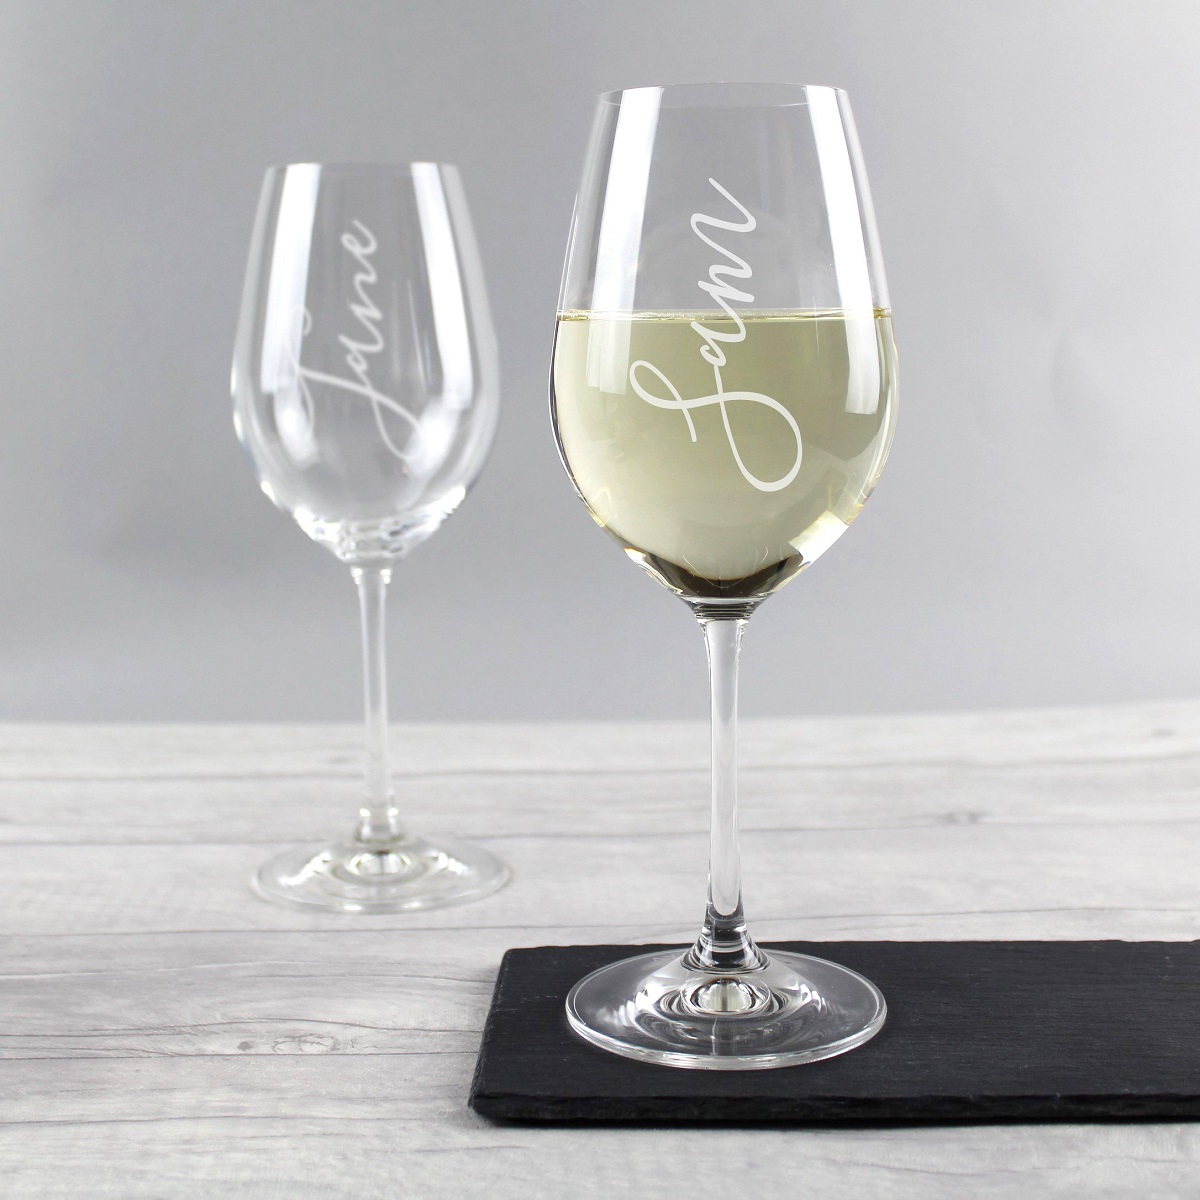 How To Write Names On Wine Glasses